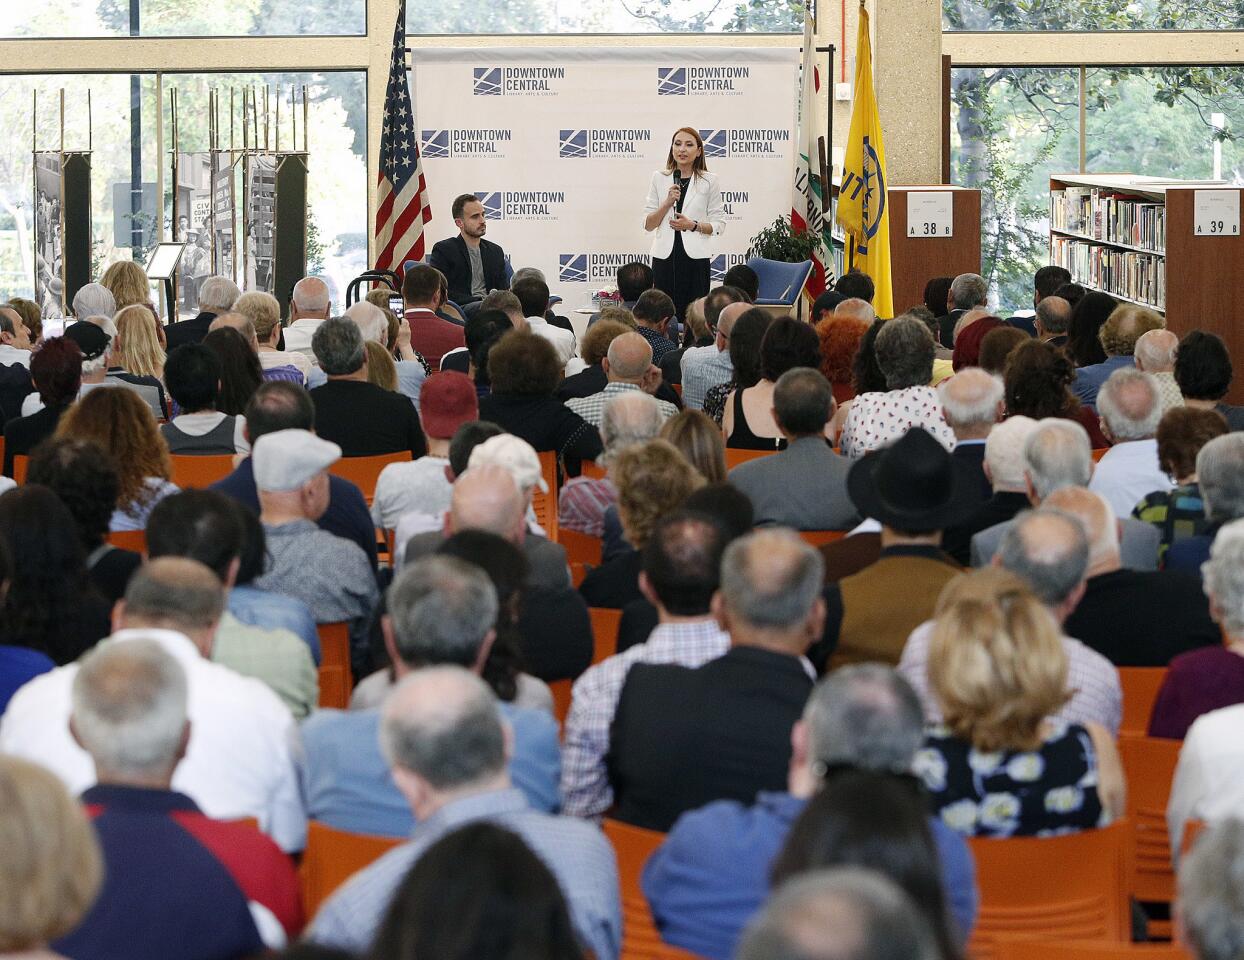 Minister of Culture for the Republic of Armenia Lilit Makunts speaks to a large crowd at the Downtown Central Library in Glendale on Thursday, June 28, 2018. Minister Makunts came to Glendale to discuss the cultural developments that led to the recent "Velvet Revolution" in Armenia and her vision for the future under the newly-established government.